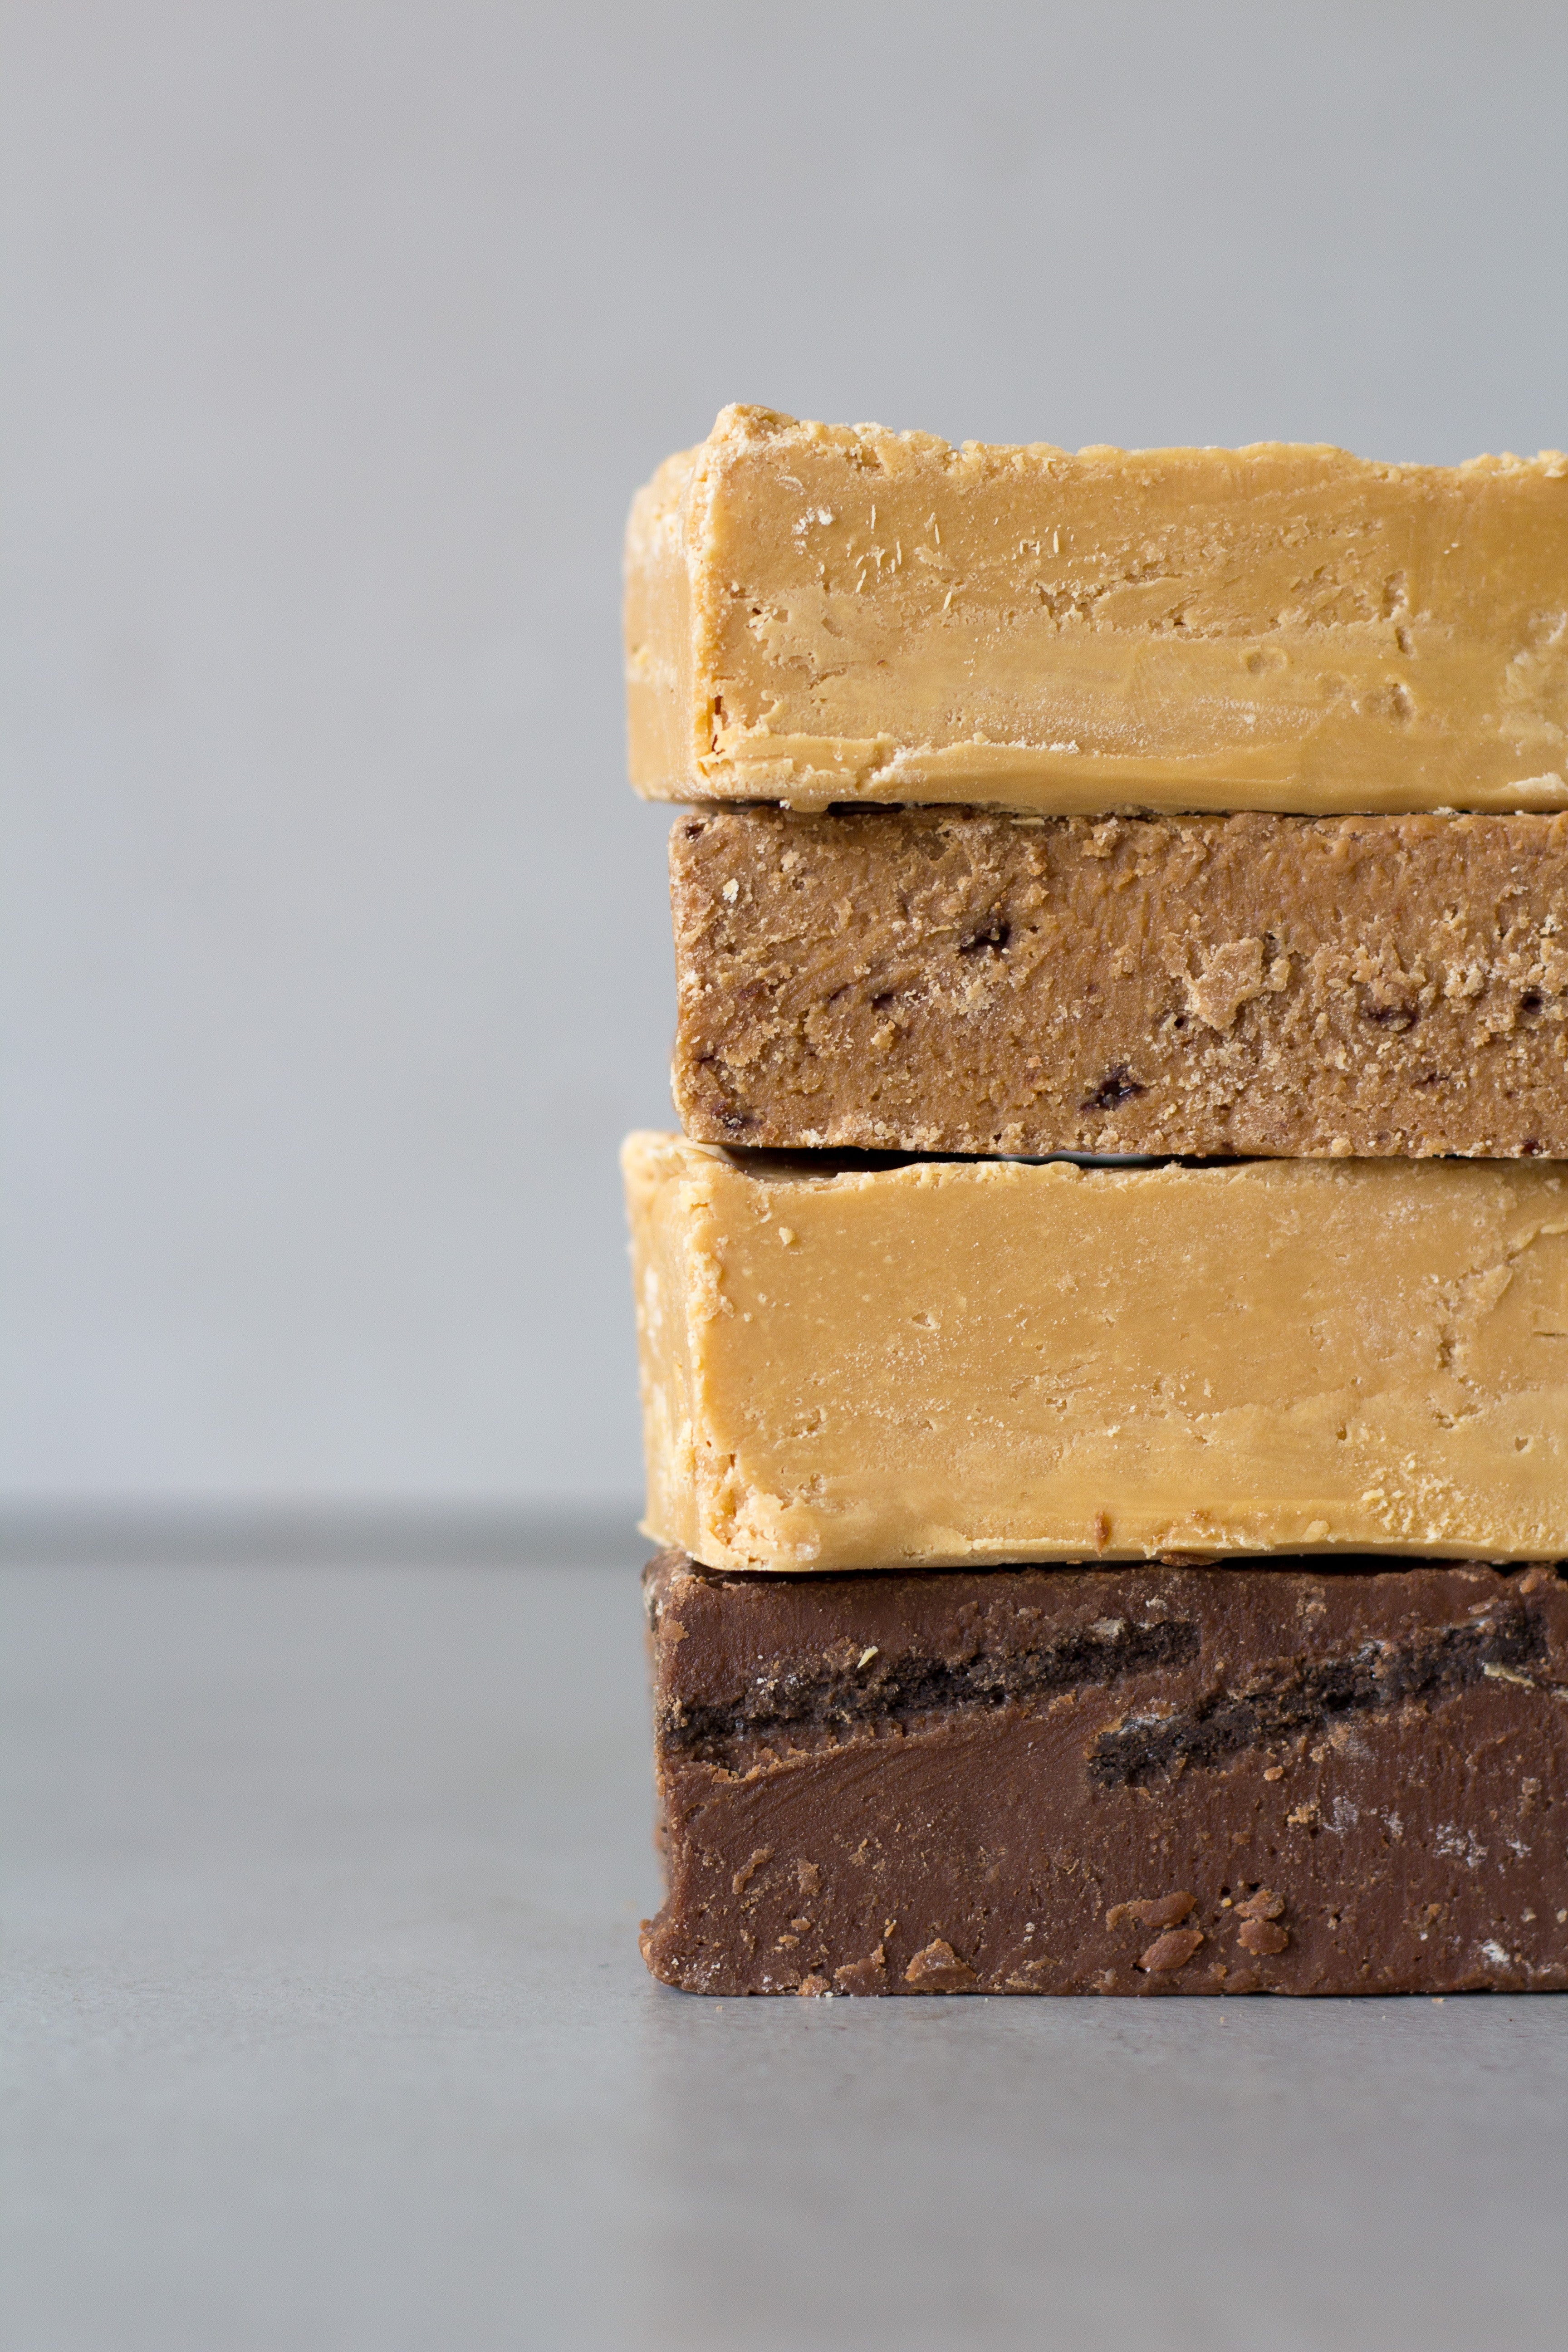 Four large blocks of fudge are stacked on top of each other, peeking out from the right side of the image - each in a different flavour and colour. The second block from the top is a slightly brown Coco Malt fudge bar.